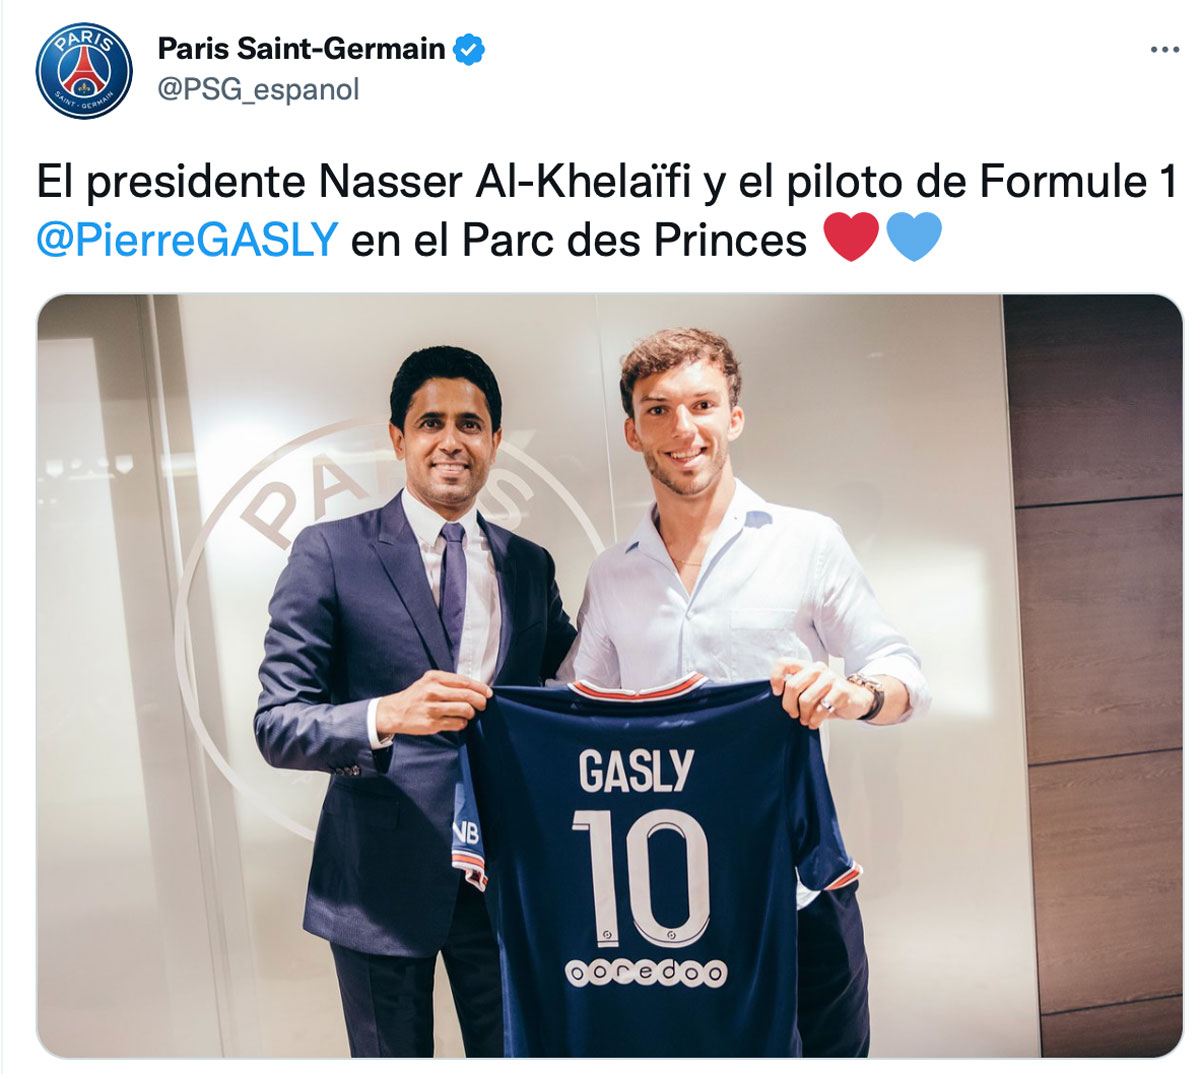 Pierre Gasly Formula 1 driver and PSG fan